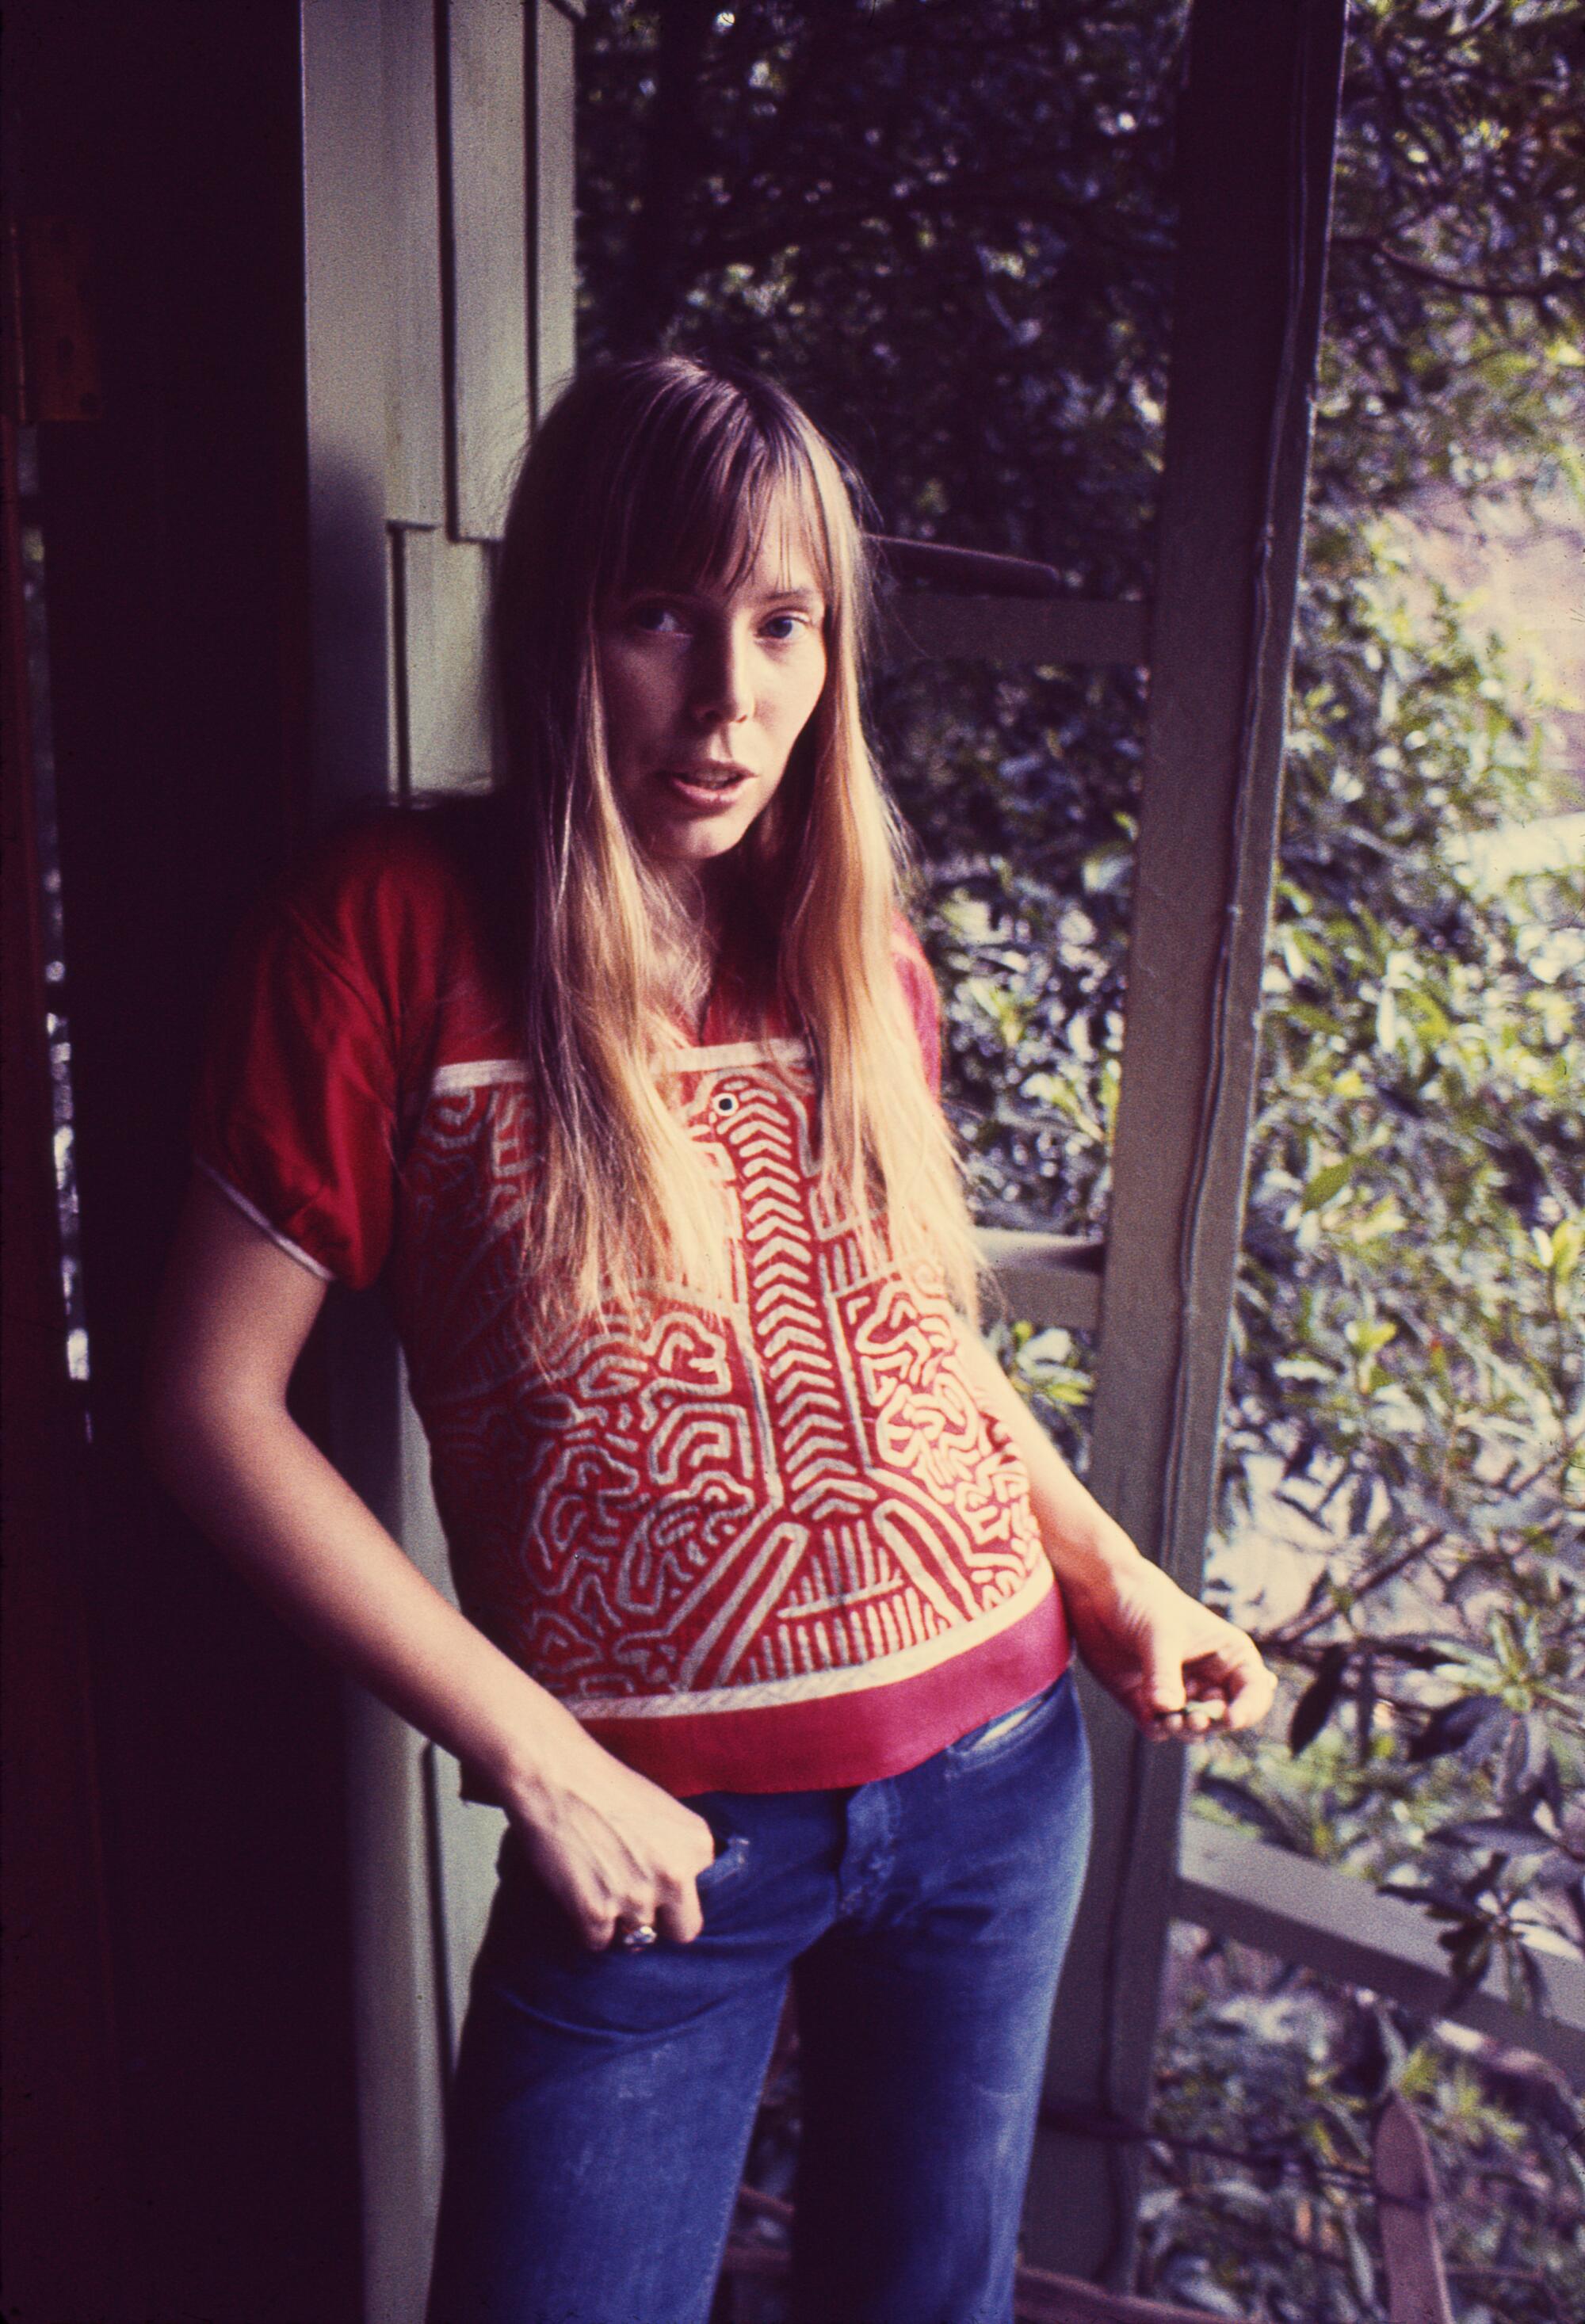 A young Joni Mitchell wearing jeans, standing against a brown shingle house.  